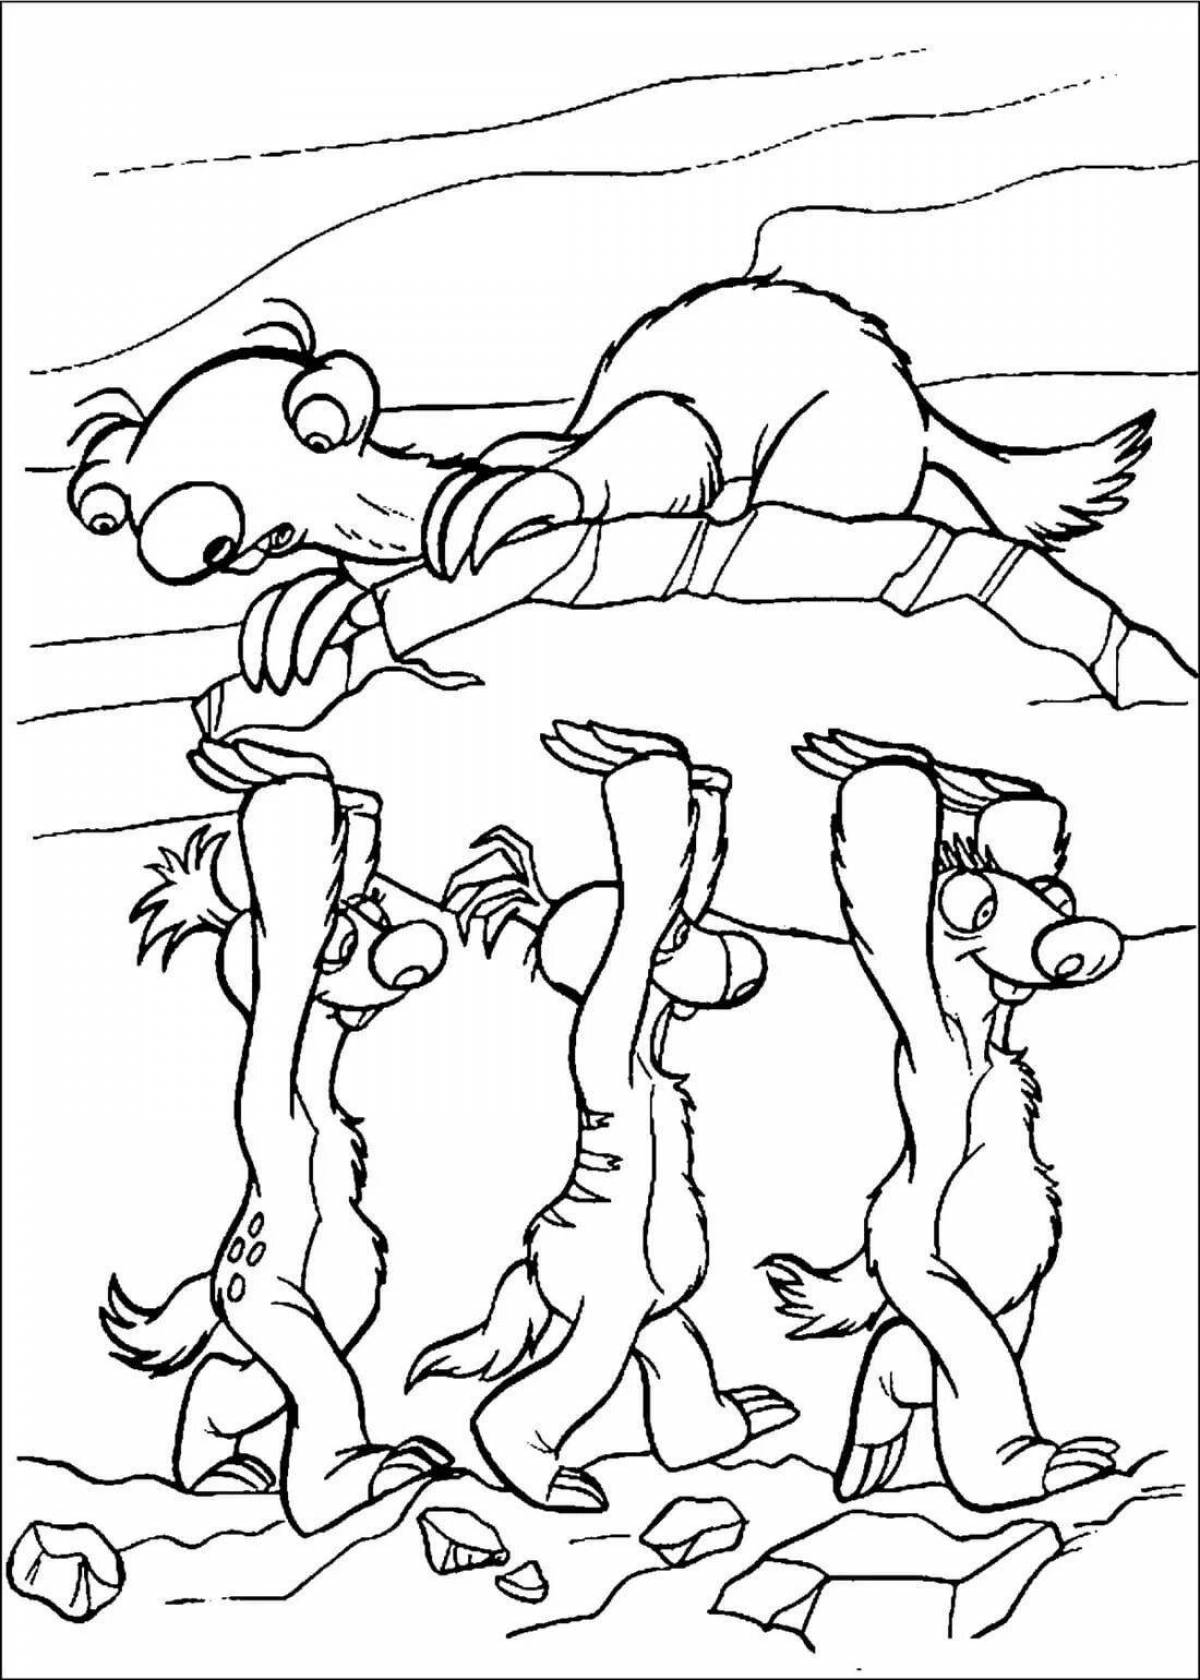 Diego ice age amazing coloring page